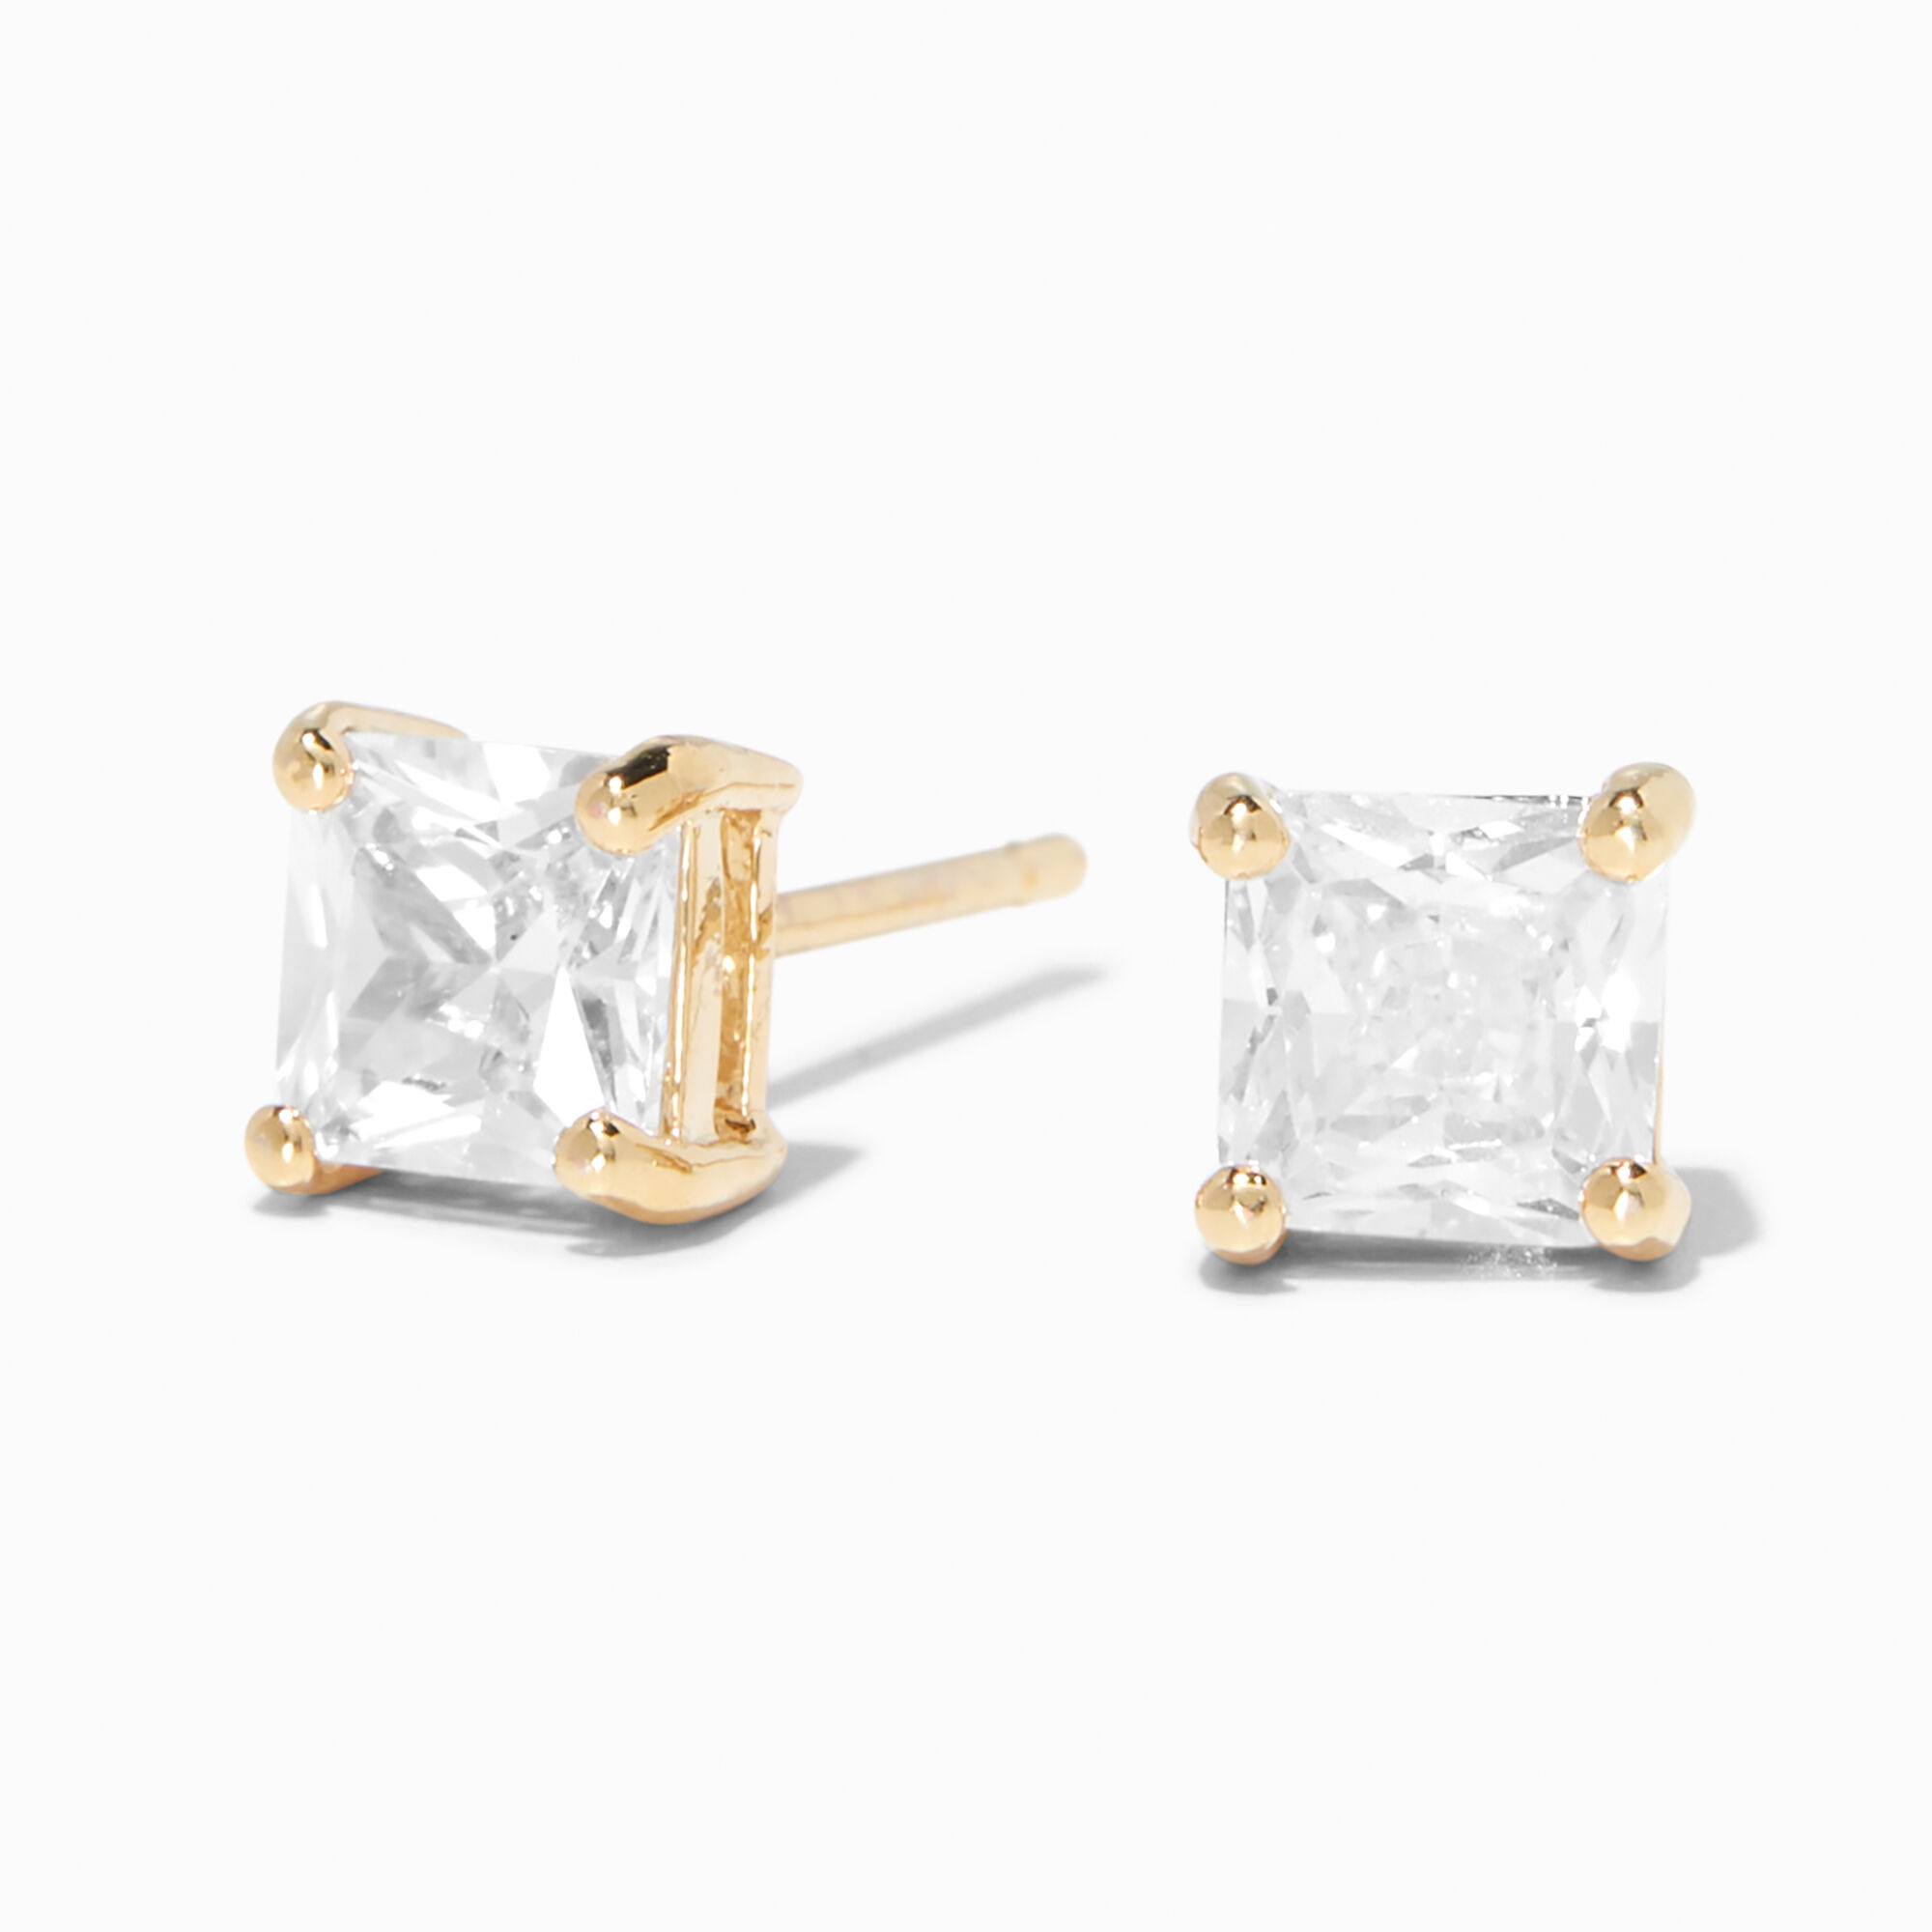 View Claires 18K Plated Cubic Zirconia 5MM Square Basket Stud Earrings Gold information